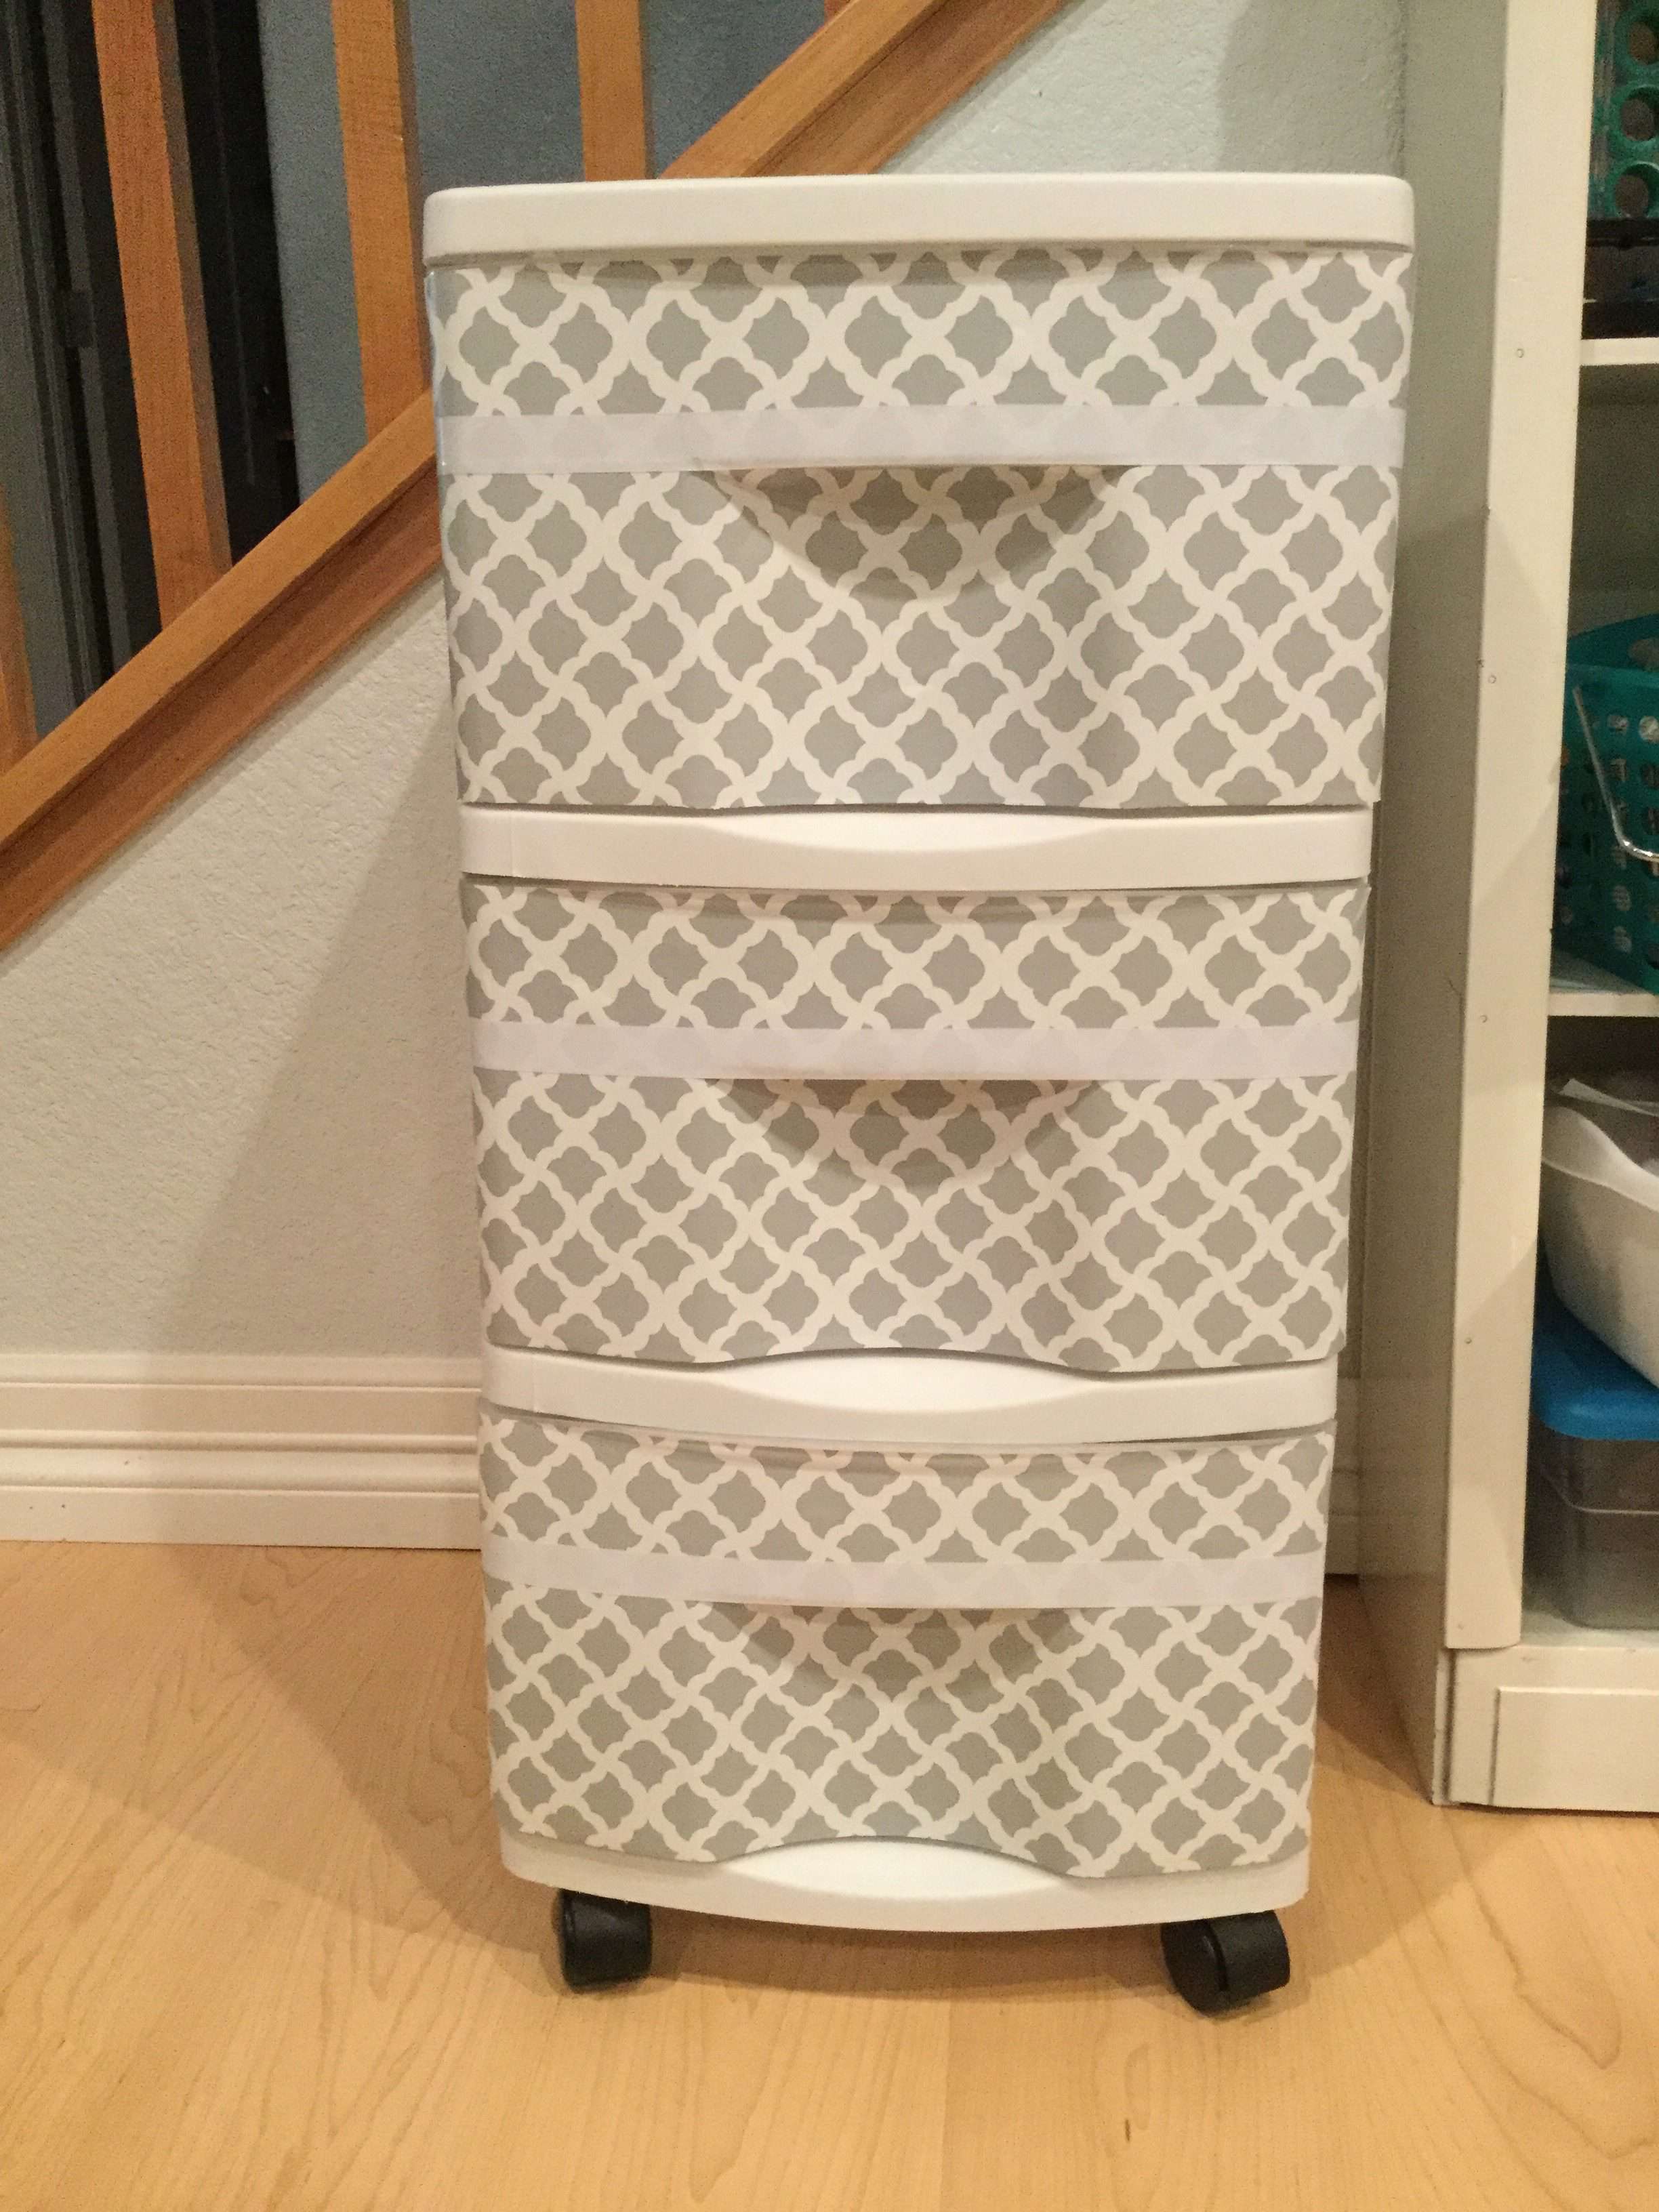 completed upcycled storage container with gray and white contact paper